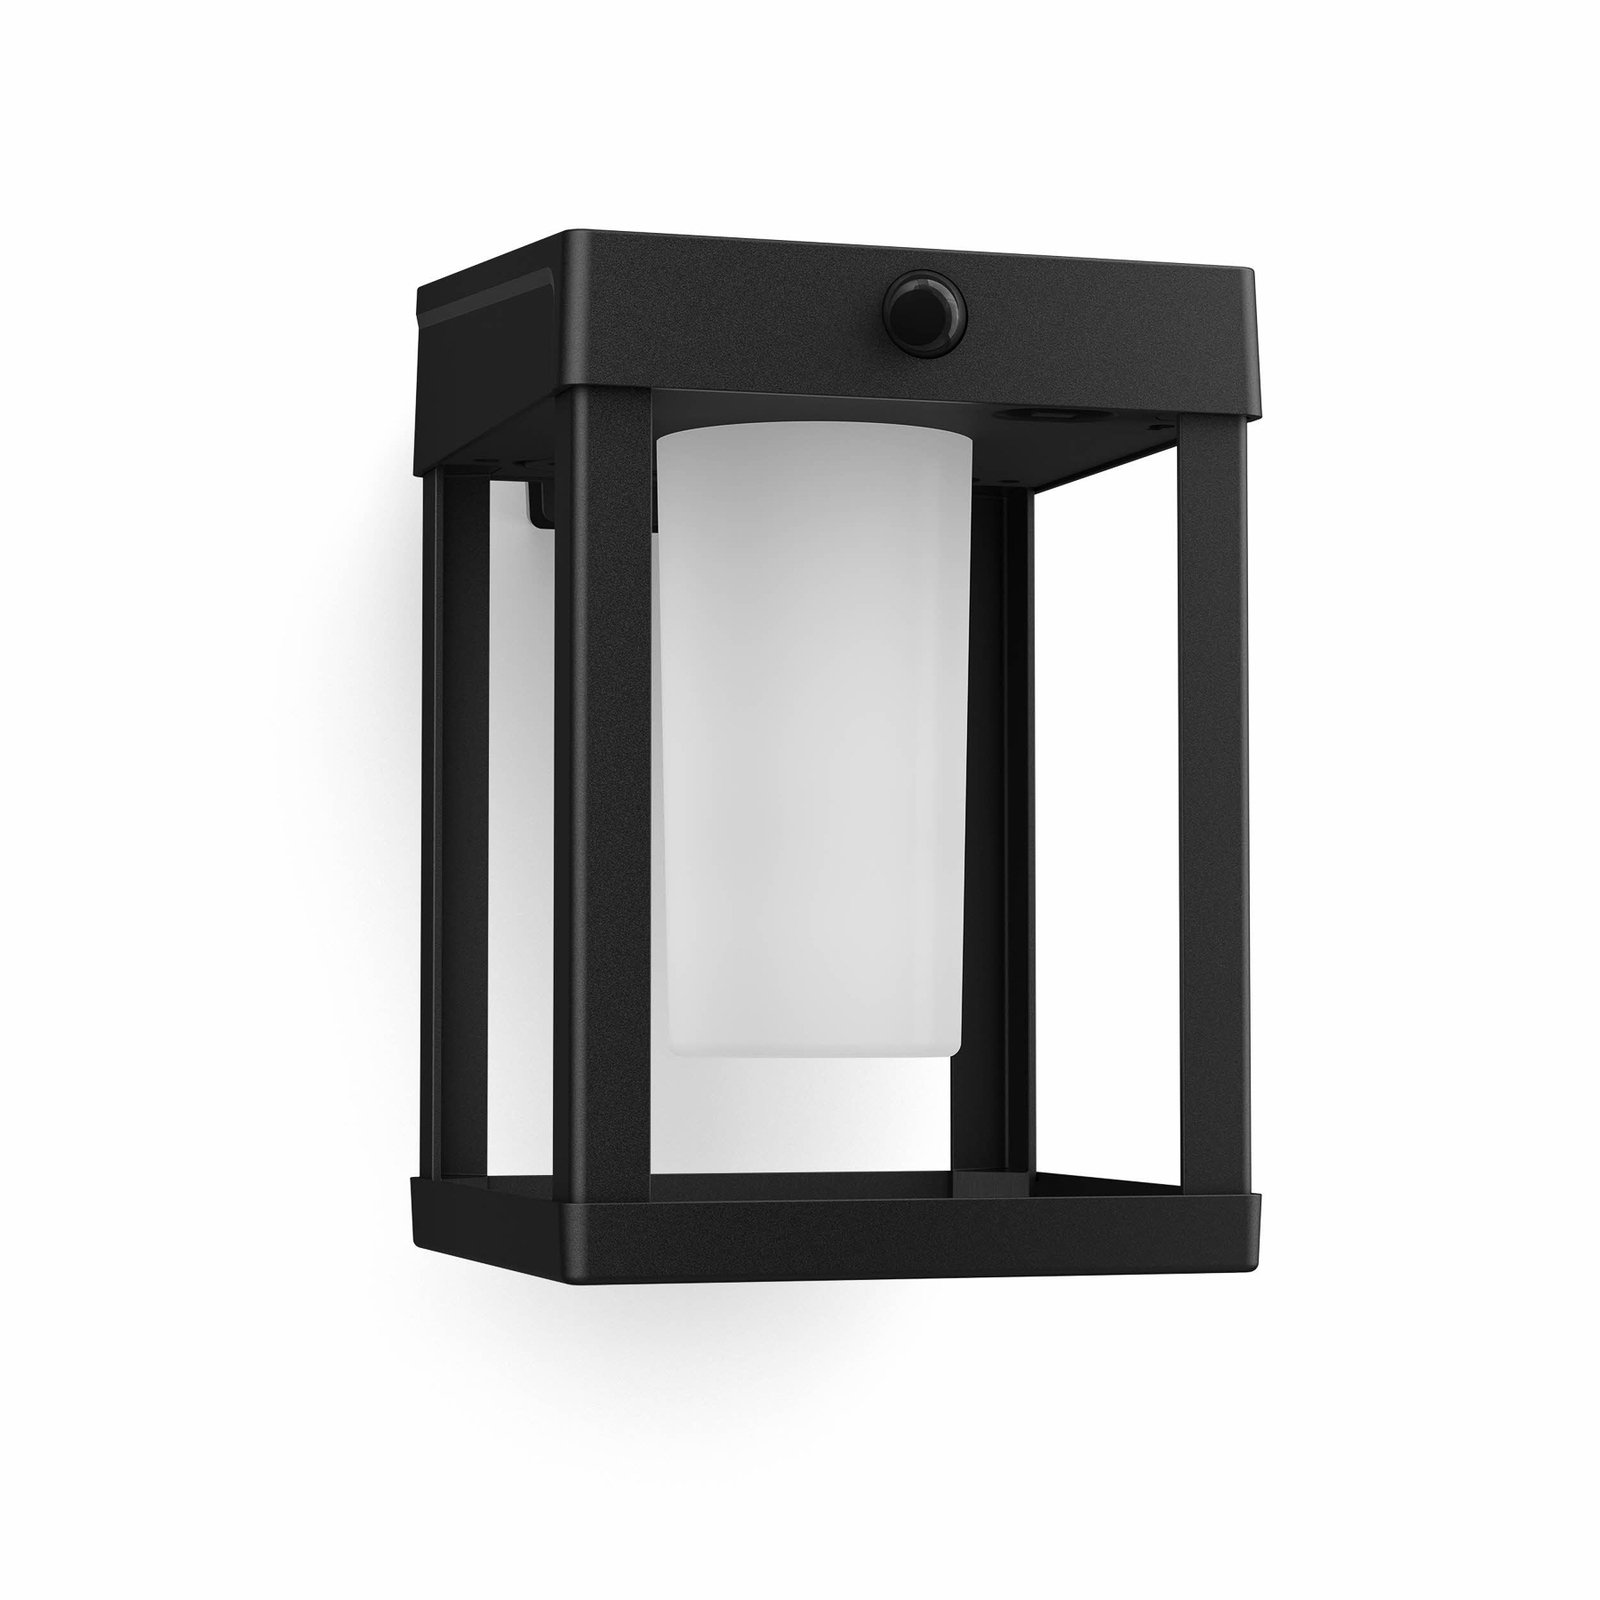 Philips LED wall lamp Camill, black/white,14 x 14 cm